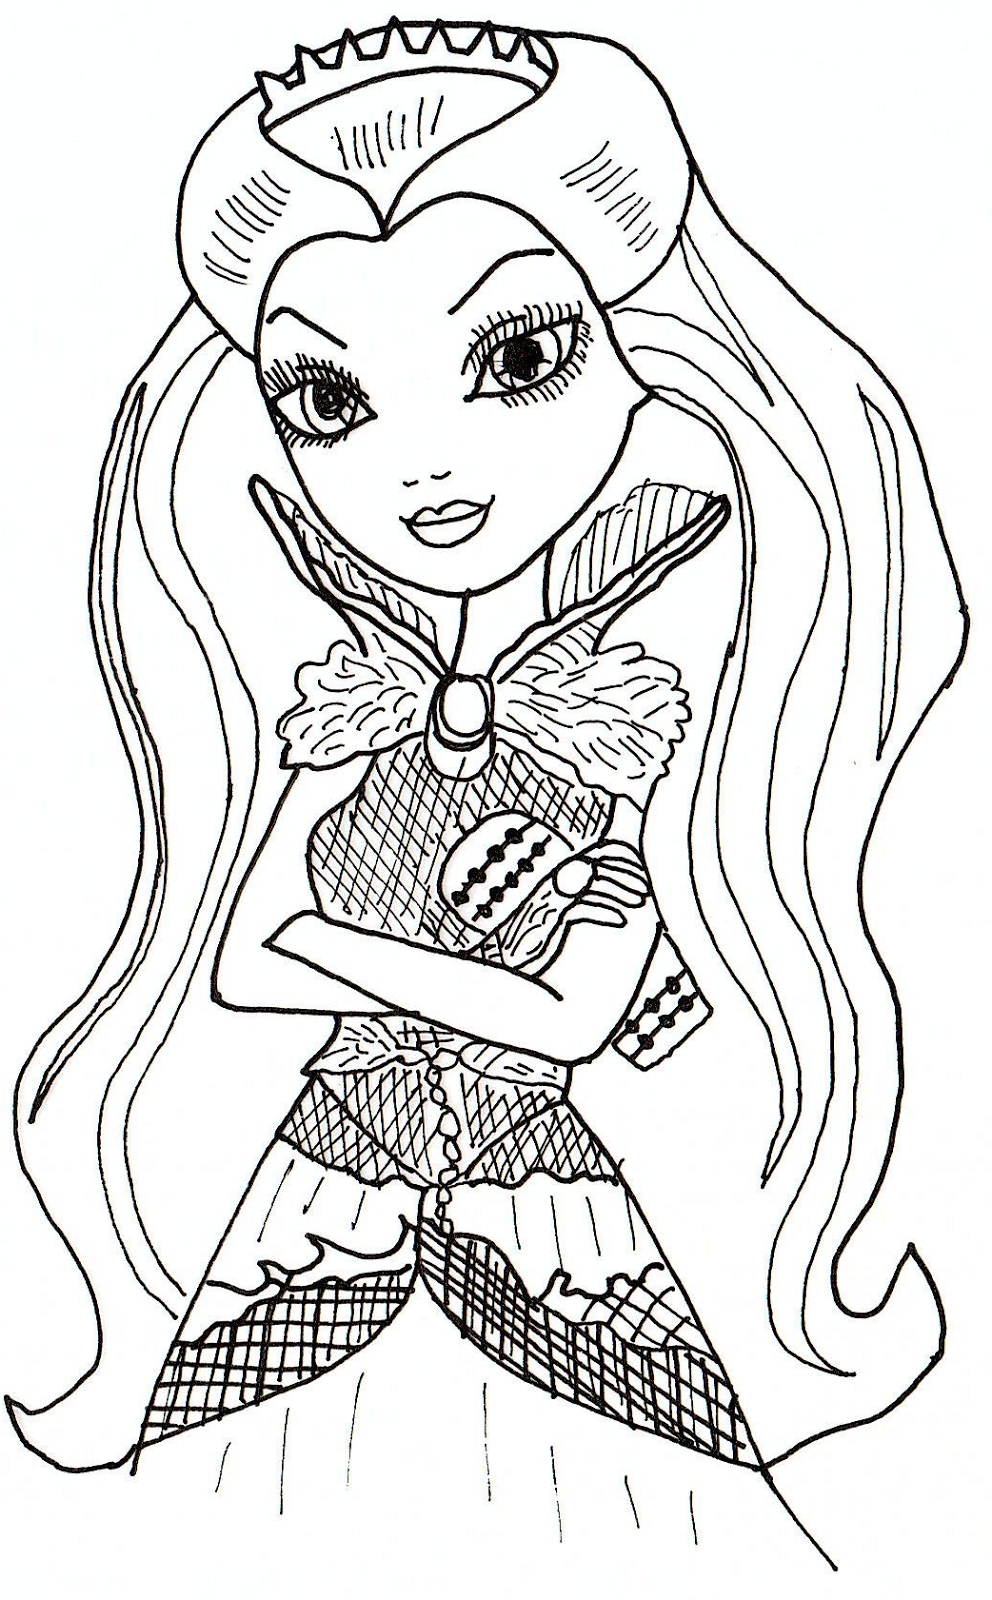 Download Free Printable Ever After High Coloring Pages: June 2013